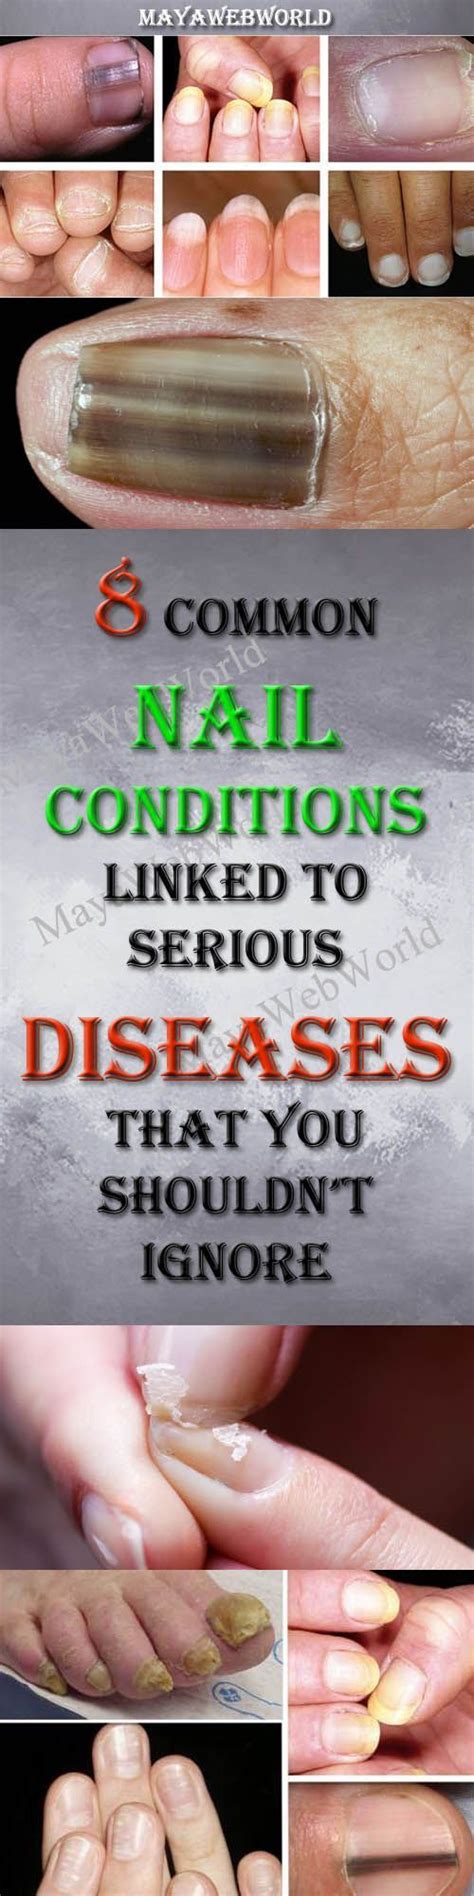 8 common nail conditions linked to serious diseases that you shouldnt ignore fitness health